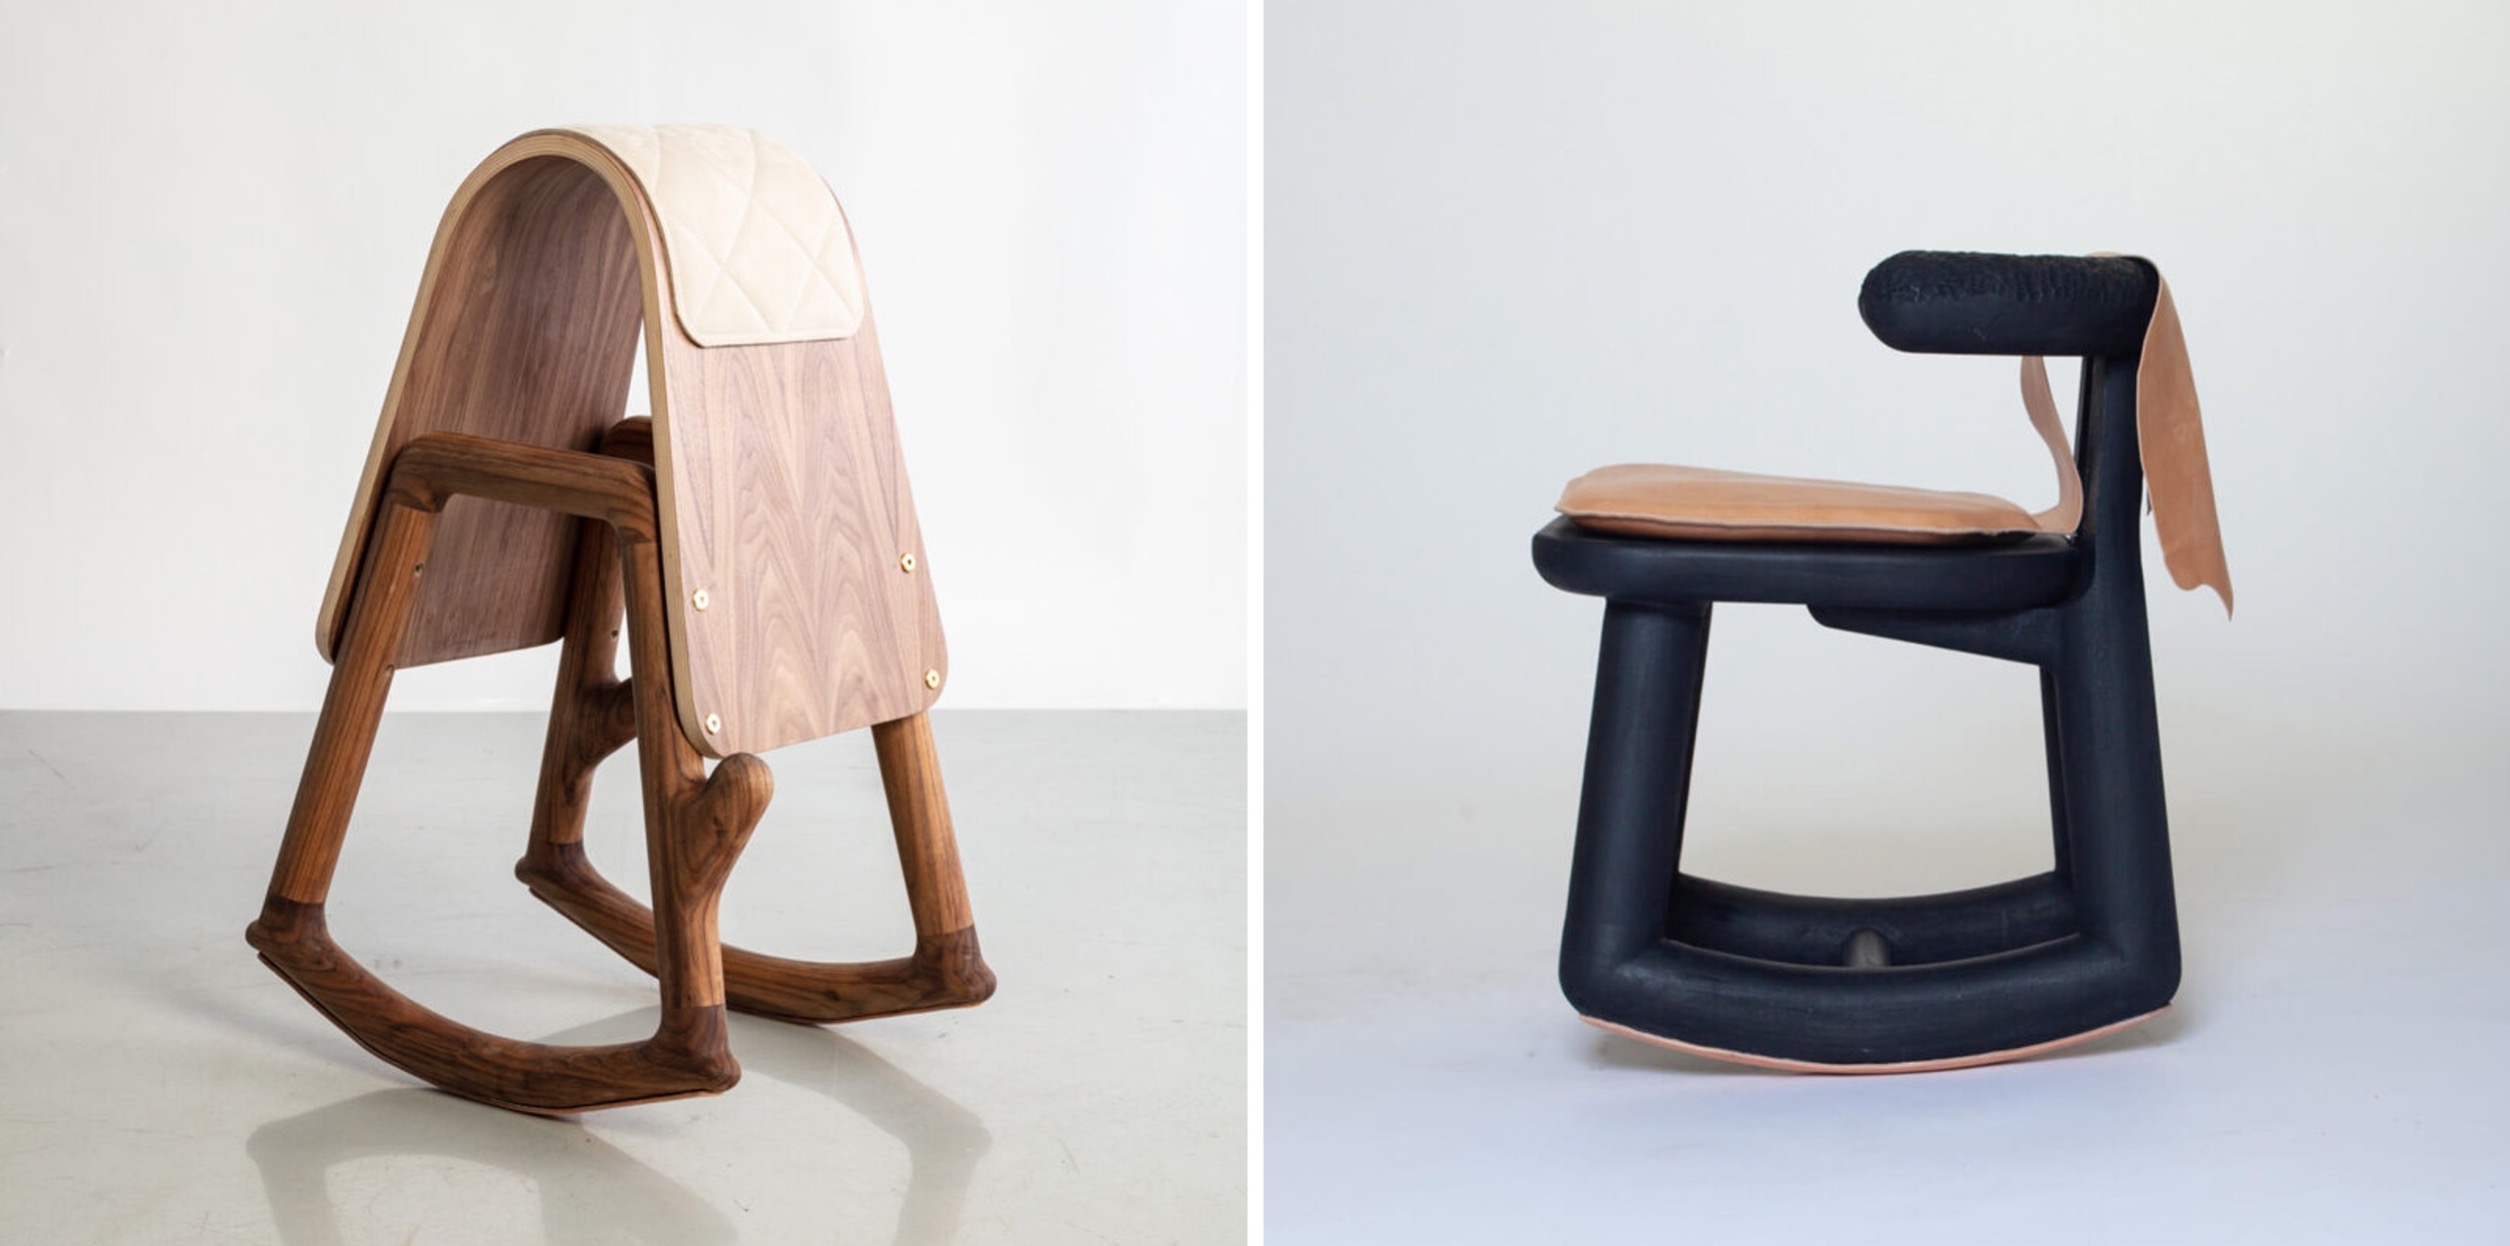 Wood stool and chair